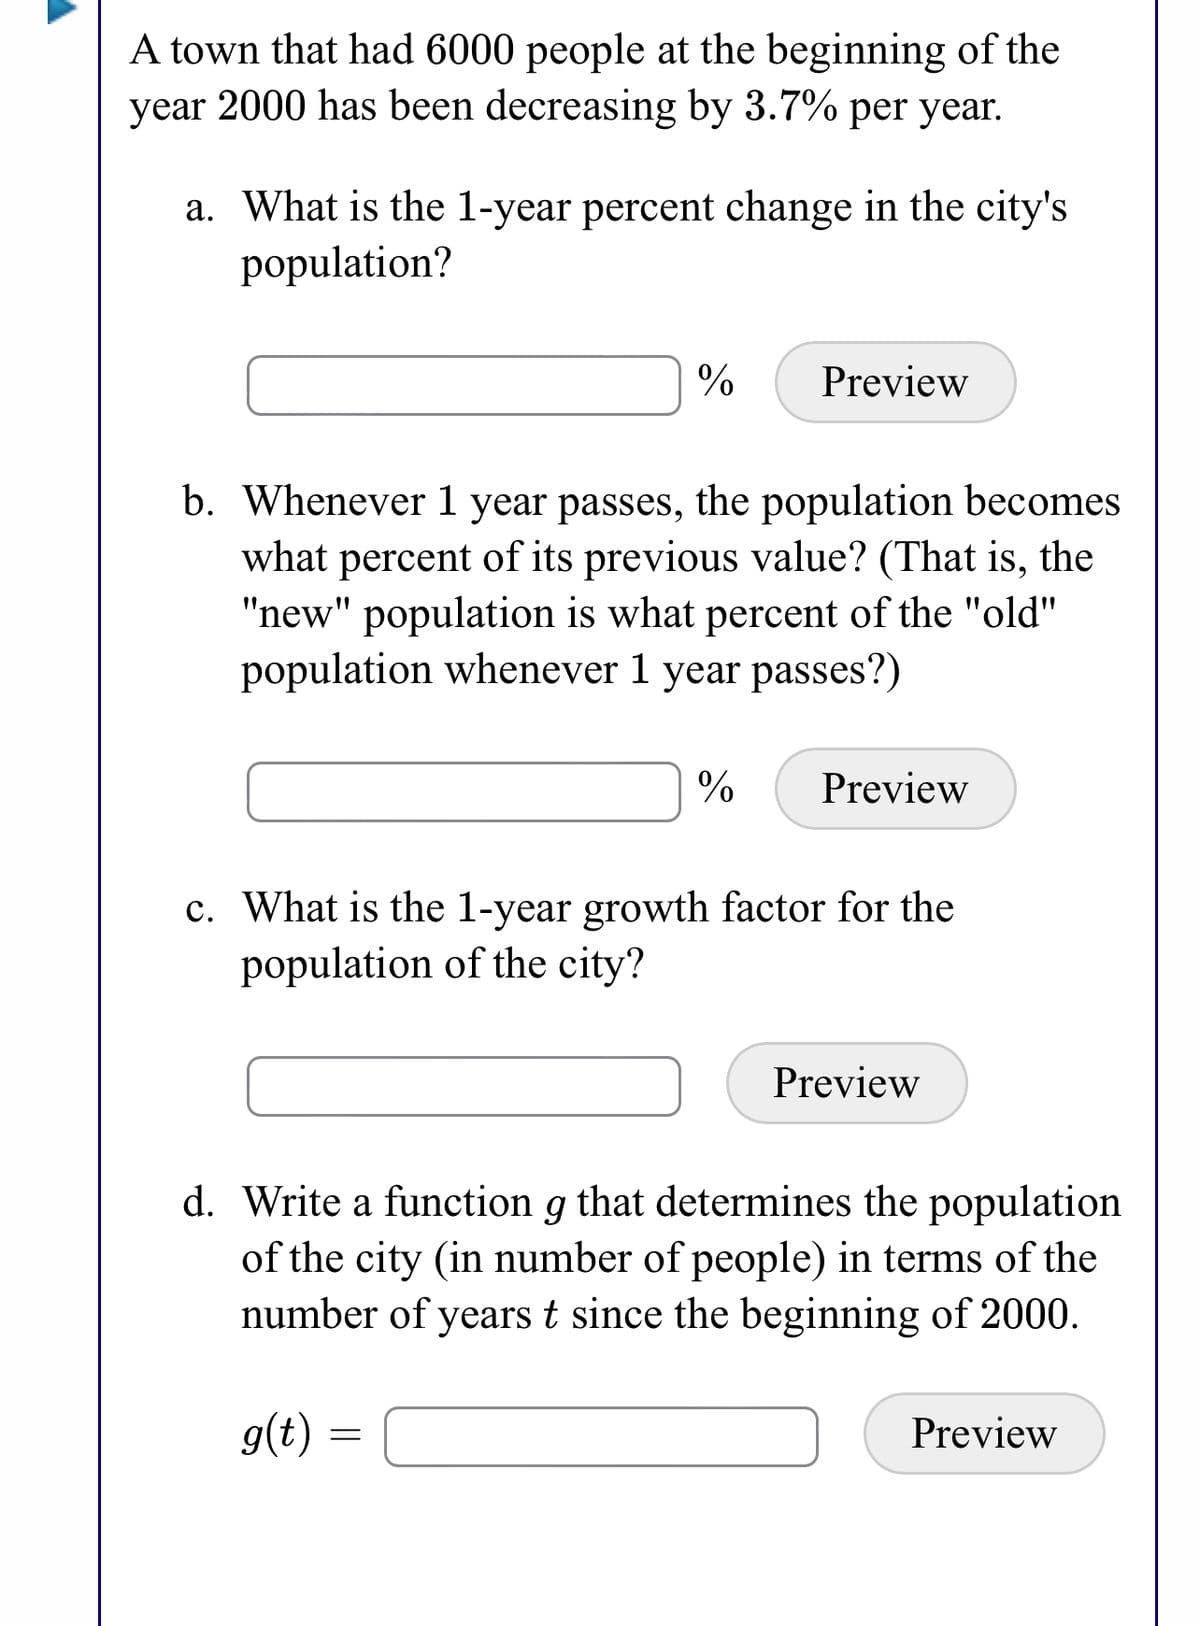 A town that had 6000 people at the beginning of the
year 2000 has been decreasing by 3.7% per year.
a. What is the 1-year percent change in the city's
population?
Preview
b. Whenever 1 year passes, the population becomes
what percent of its previous value? (That is, the
"new" population is what percent of the "old"
population whenever 1 year passes?)
%
Preview
c. What is the 1-year growth factor for the
population of the city?
Preview
d. Write a function g that determines the population
of the city (in number of people) in terms of the
number of years t since the beginning of 2000.
g(t) =
Preview
